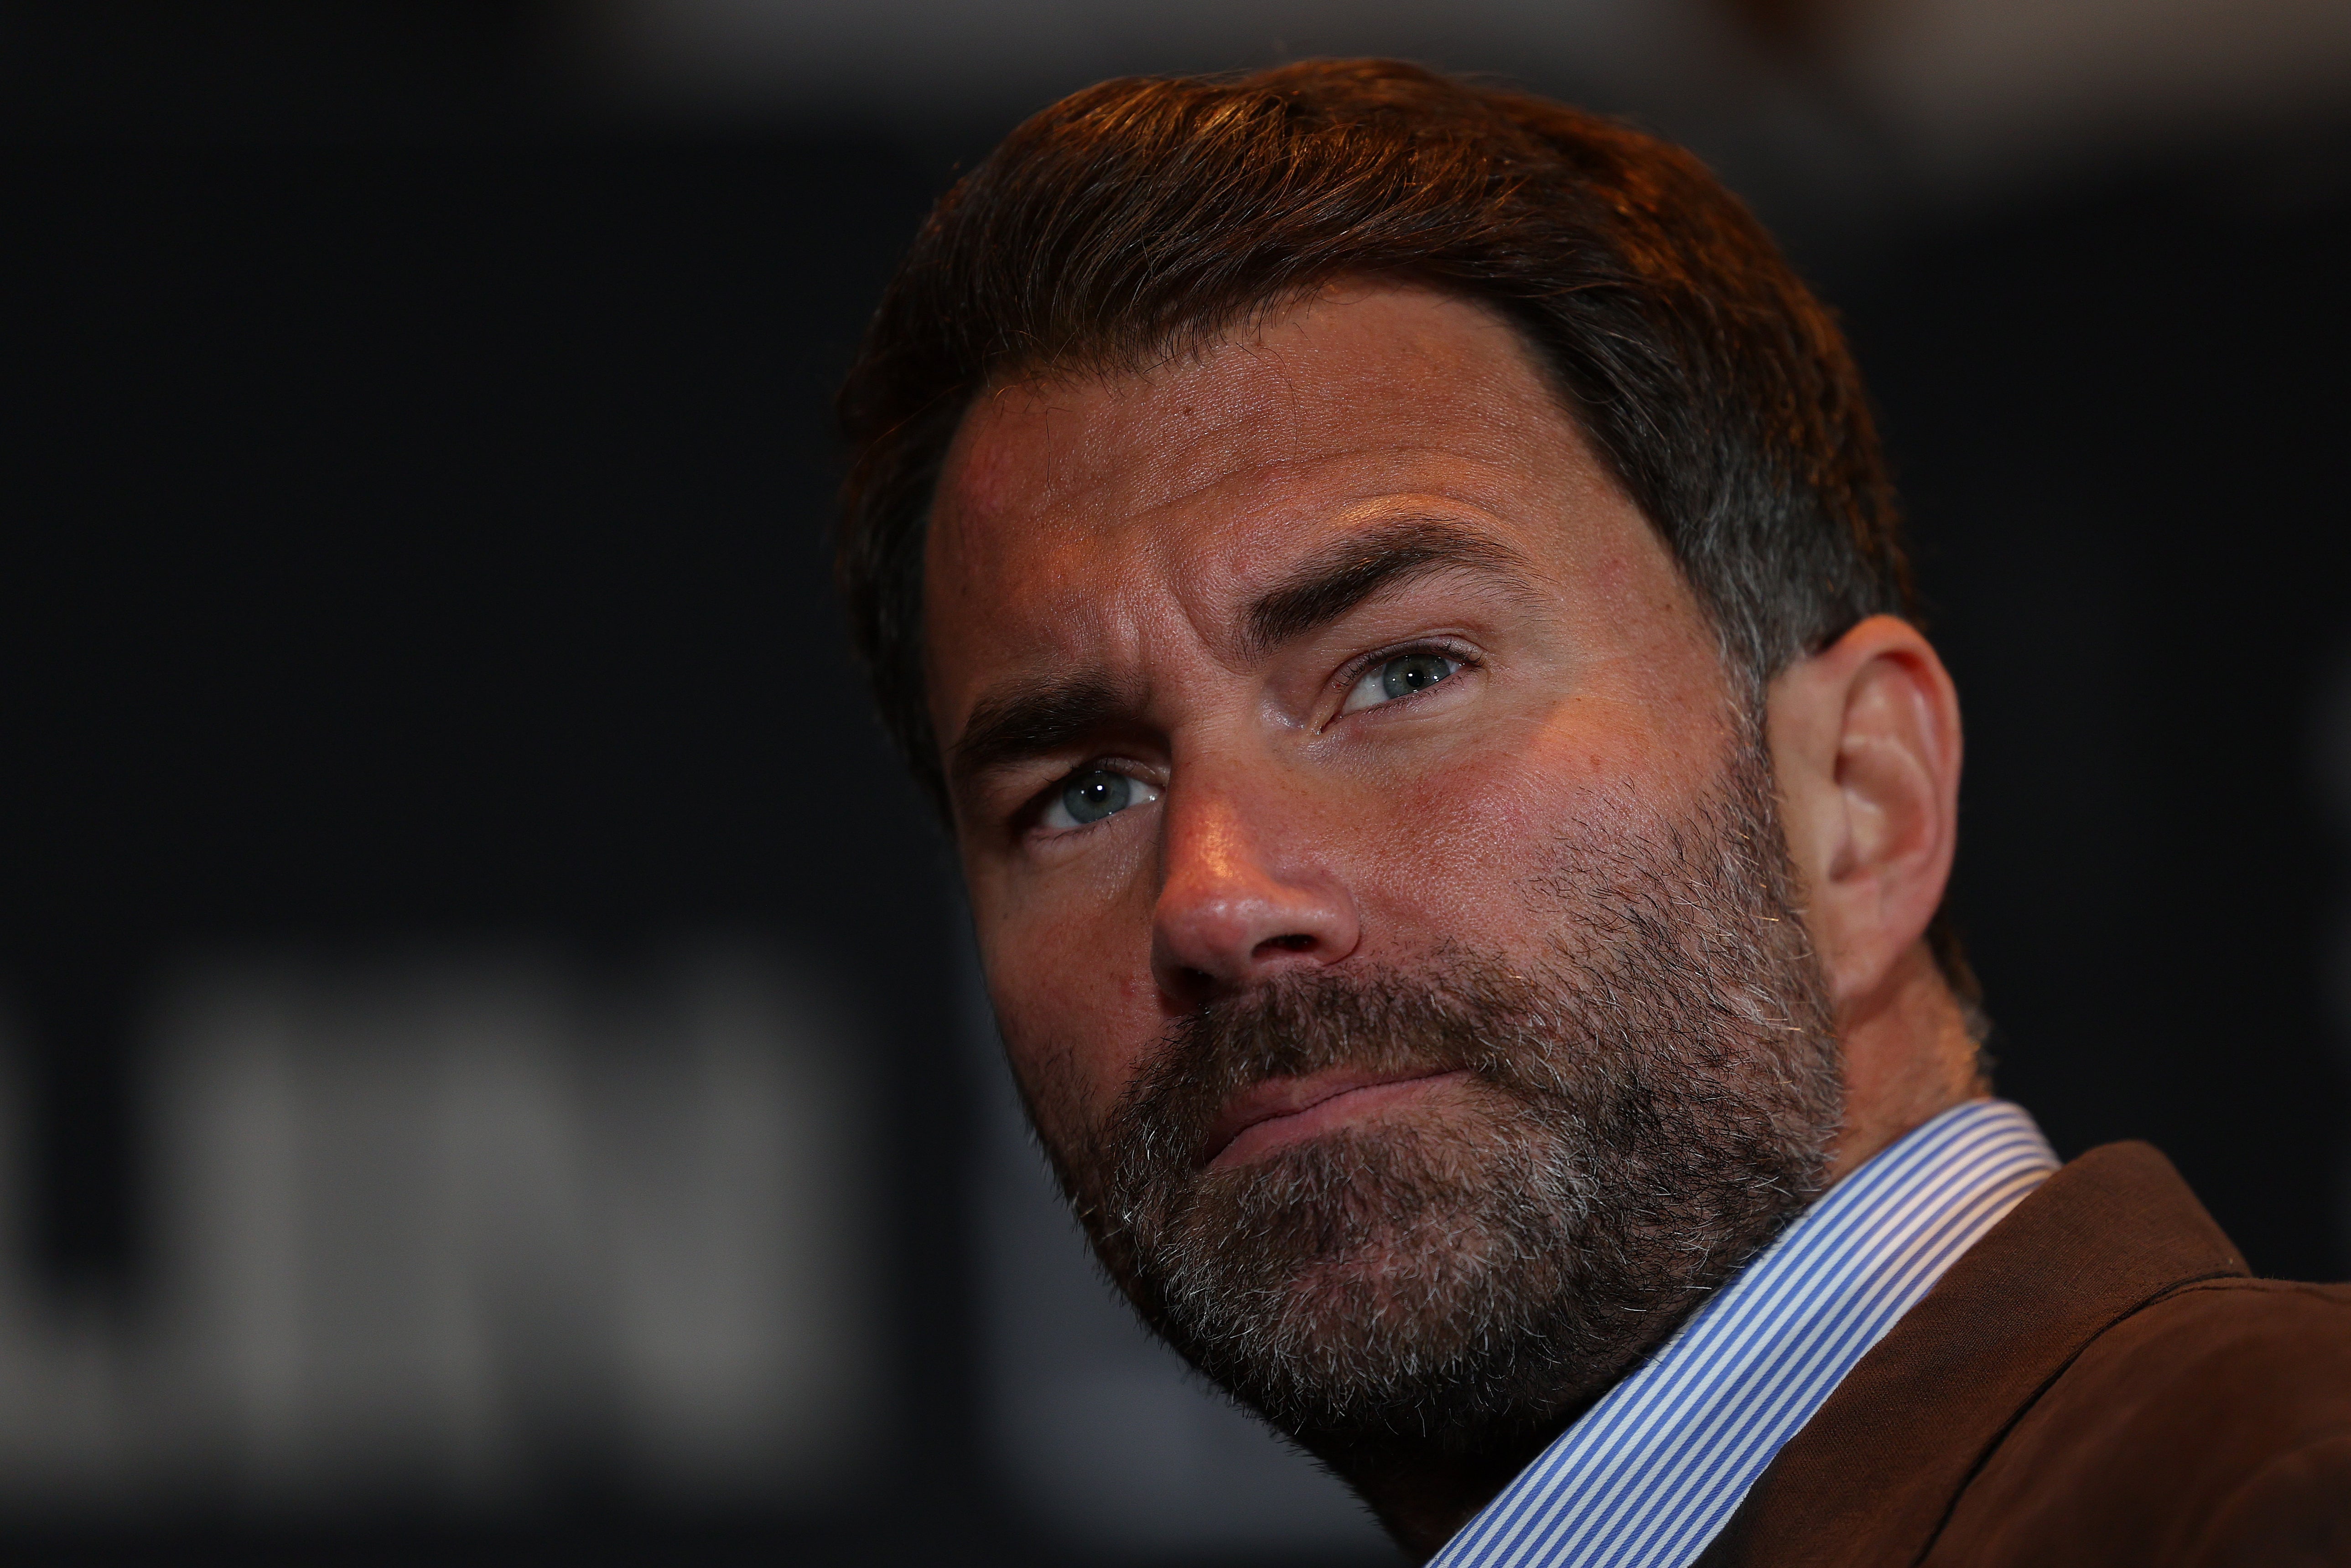 Eddie Hearn, head of Matchroom Boxing and one of the sport’s best-known promoters